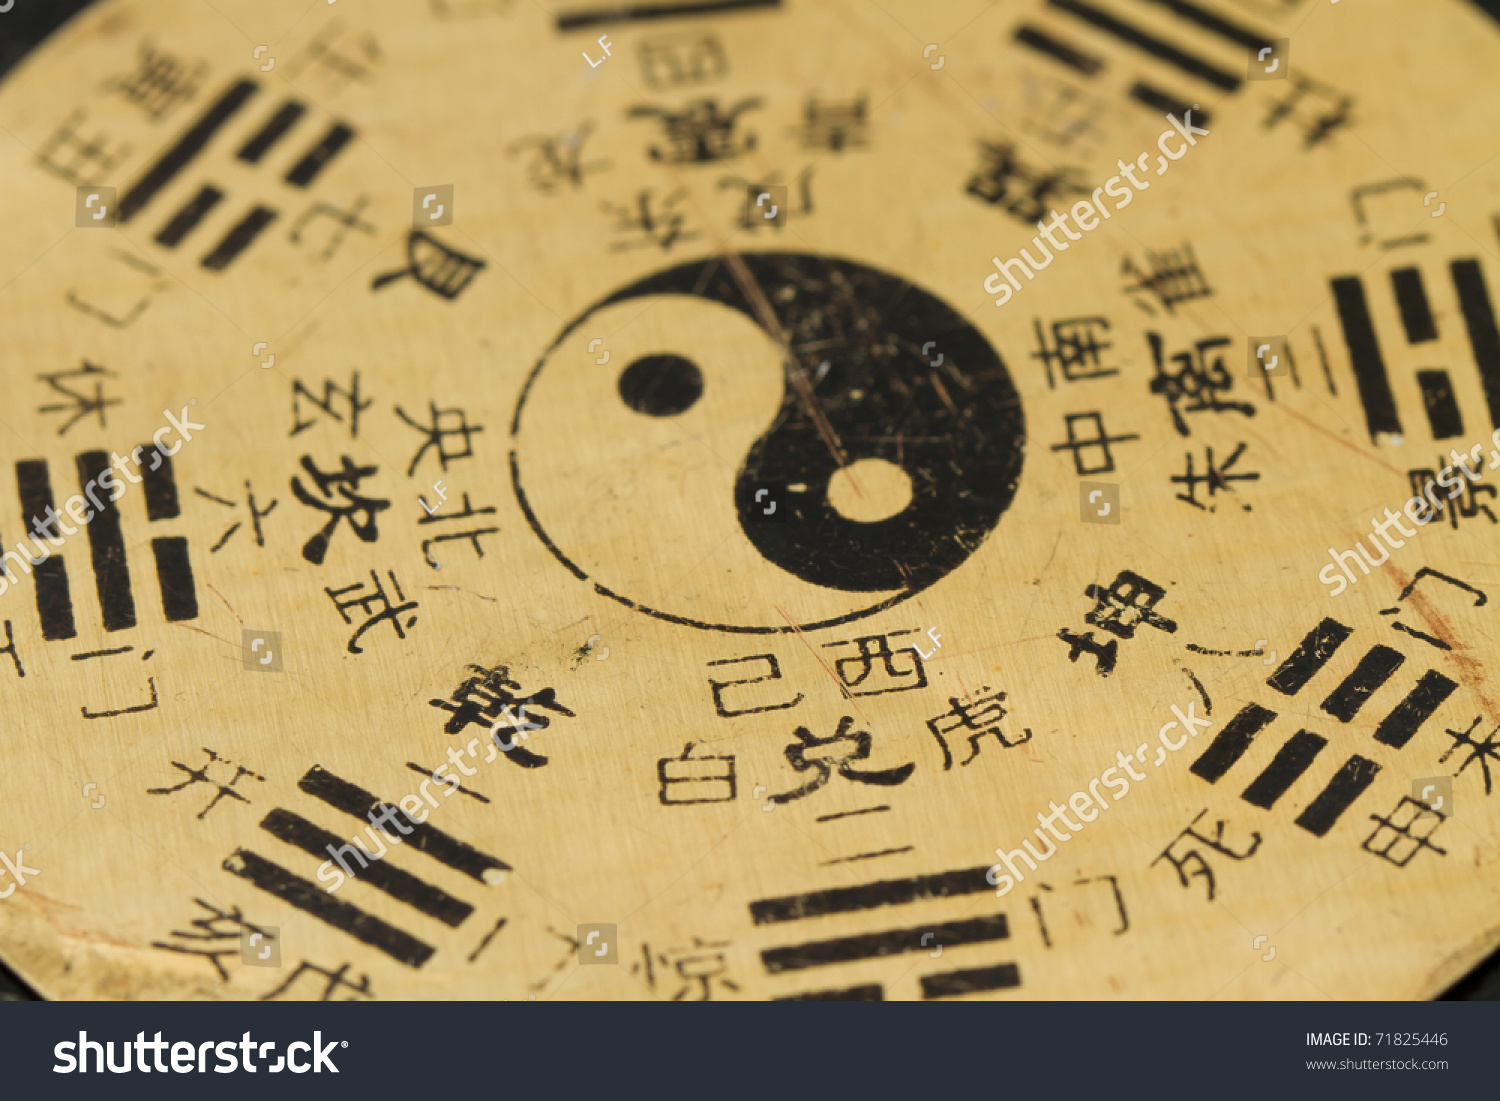 http://image.shutterstock.com/z/stock-photo-gossip-disk-used-to-predict-the-fate-and-the-feng-shui-71825446.jpg